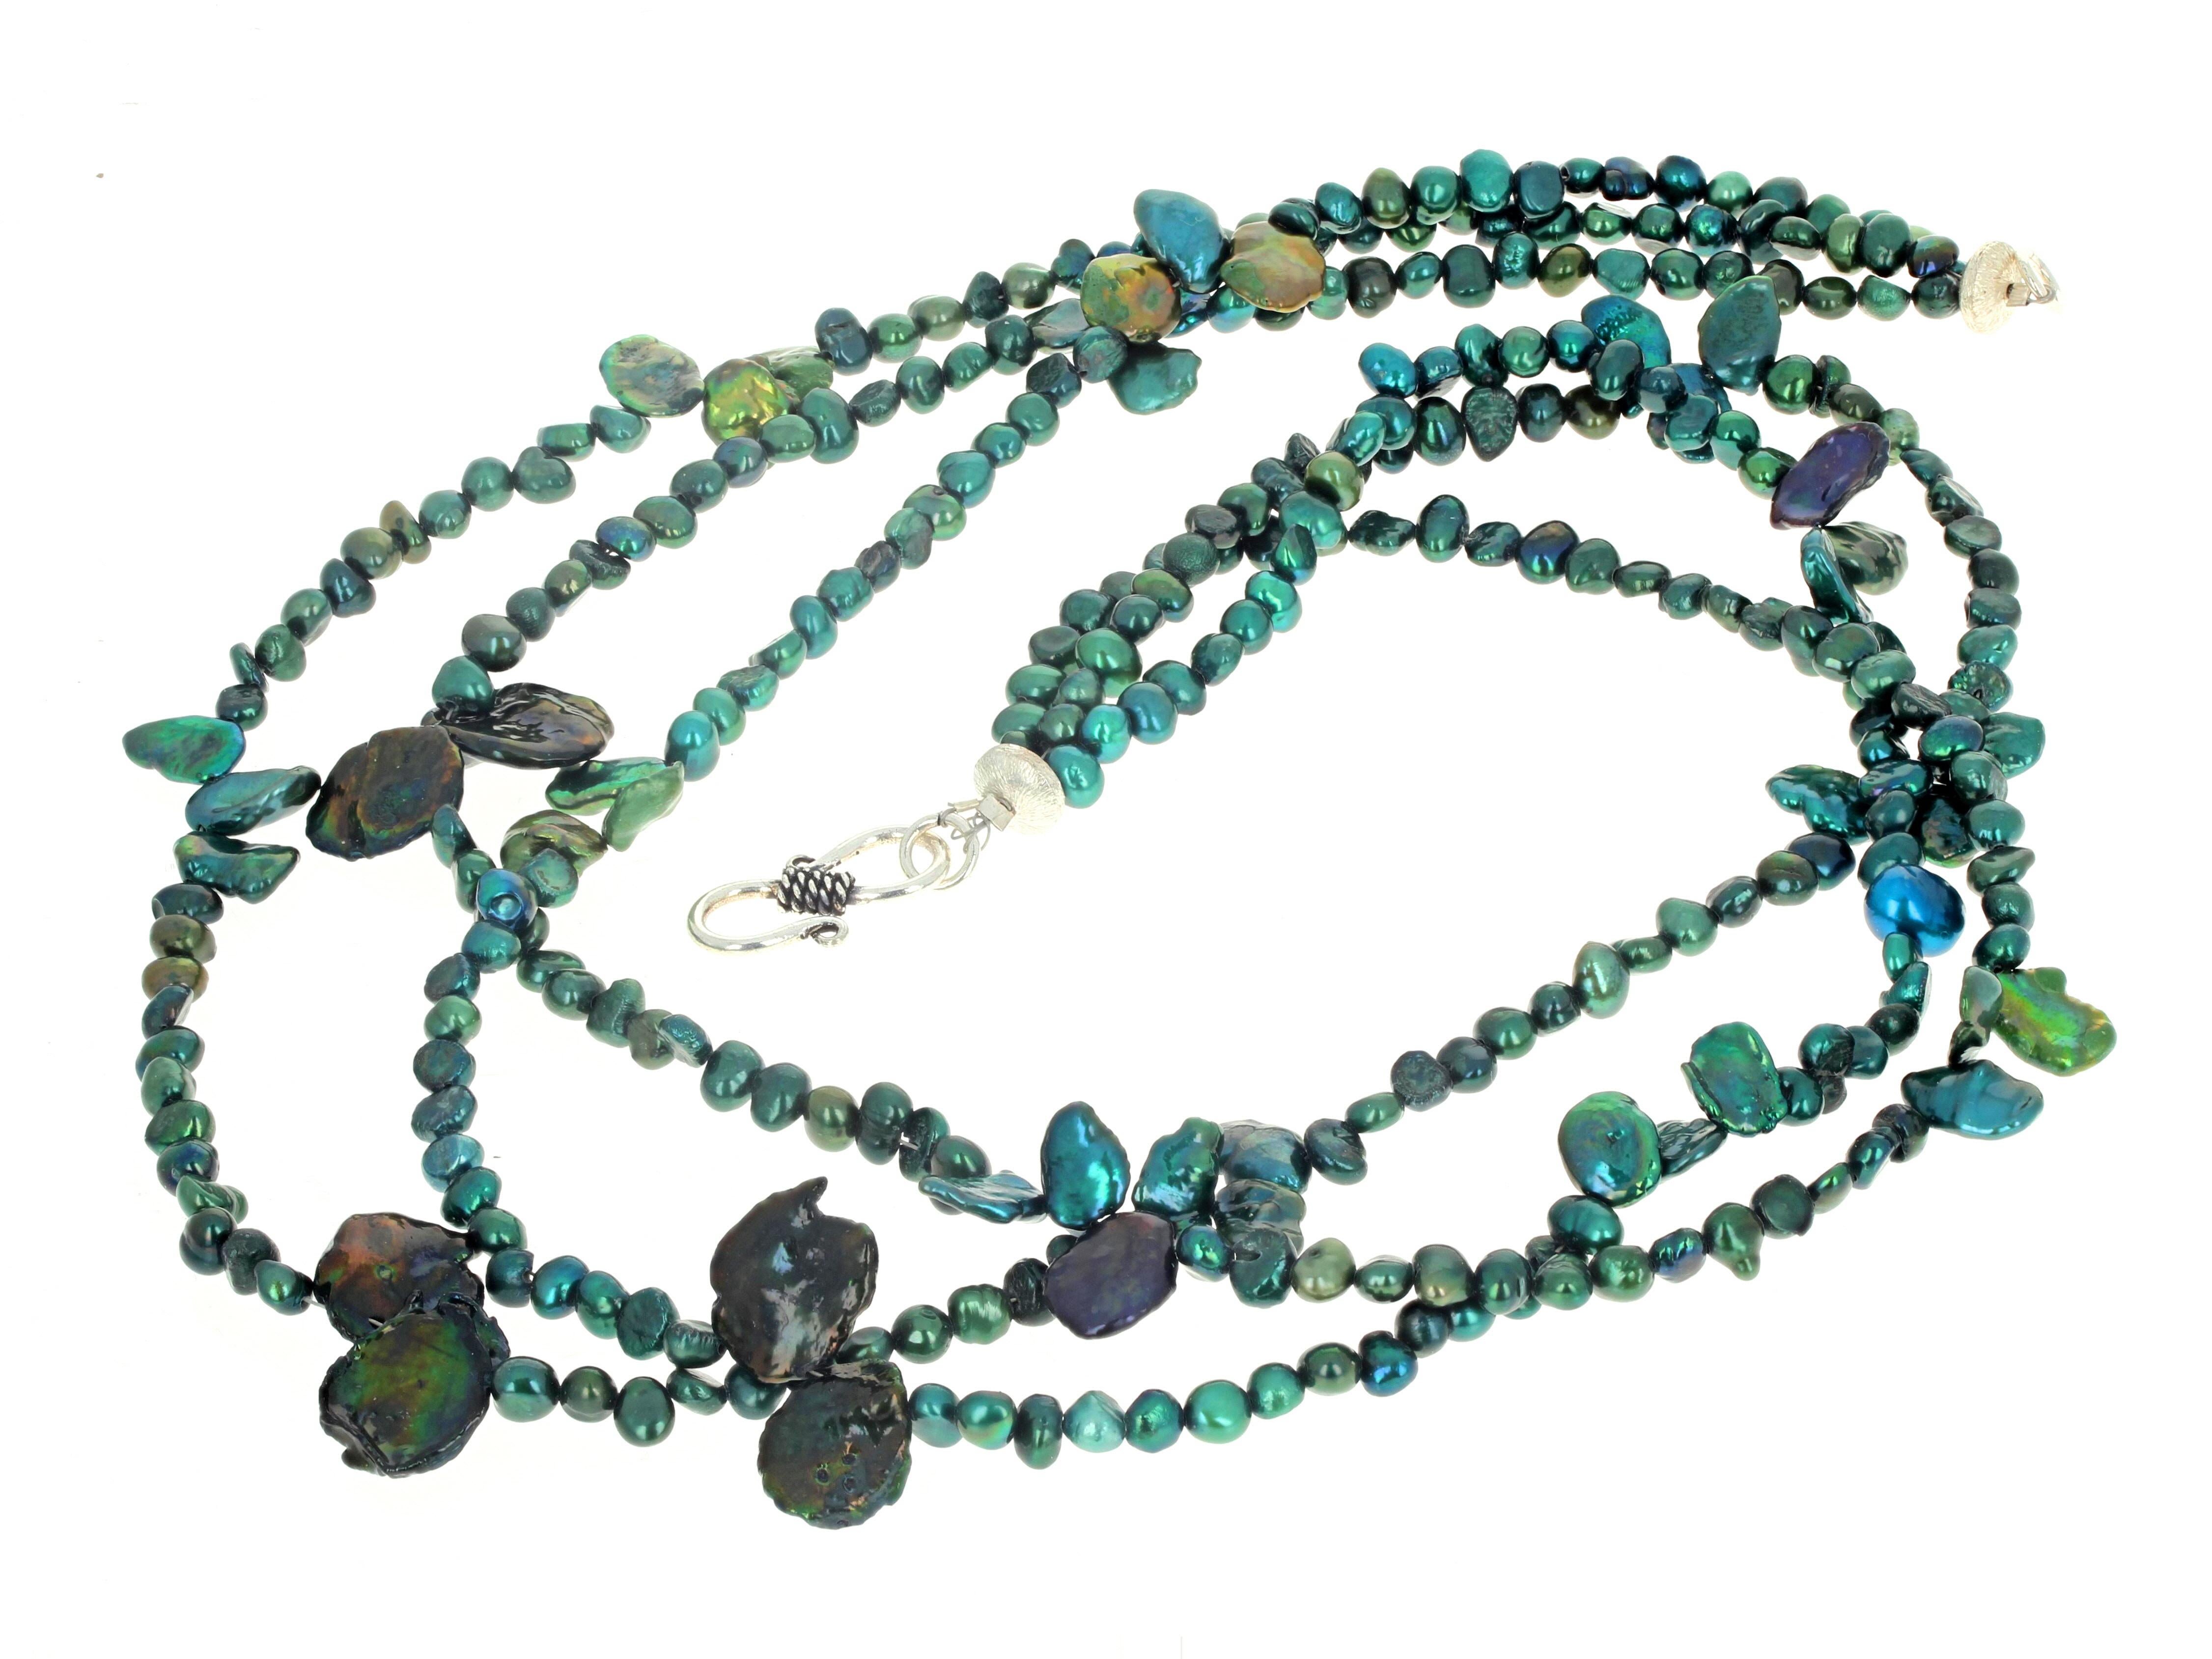 This beautiful triple strand of bluegreen real cultured Pearls enhanced by the natural bluegreen Pearl shells are set in this 19 1/2 inch long triple strand necklace.  They flip and flop magnificently.  The silver clasp is an easy to use hook clasp.